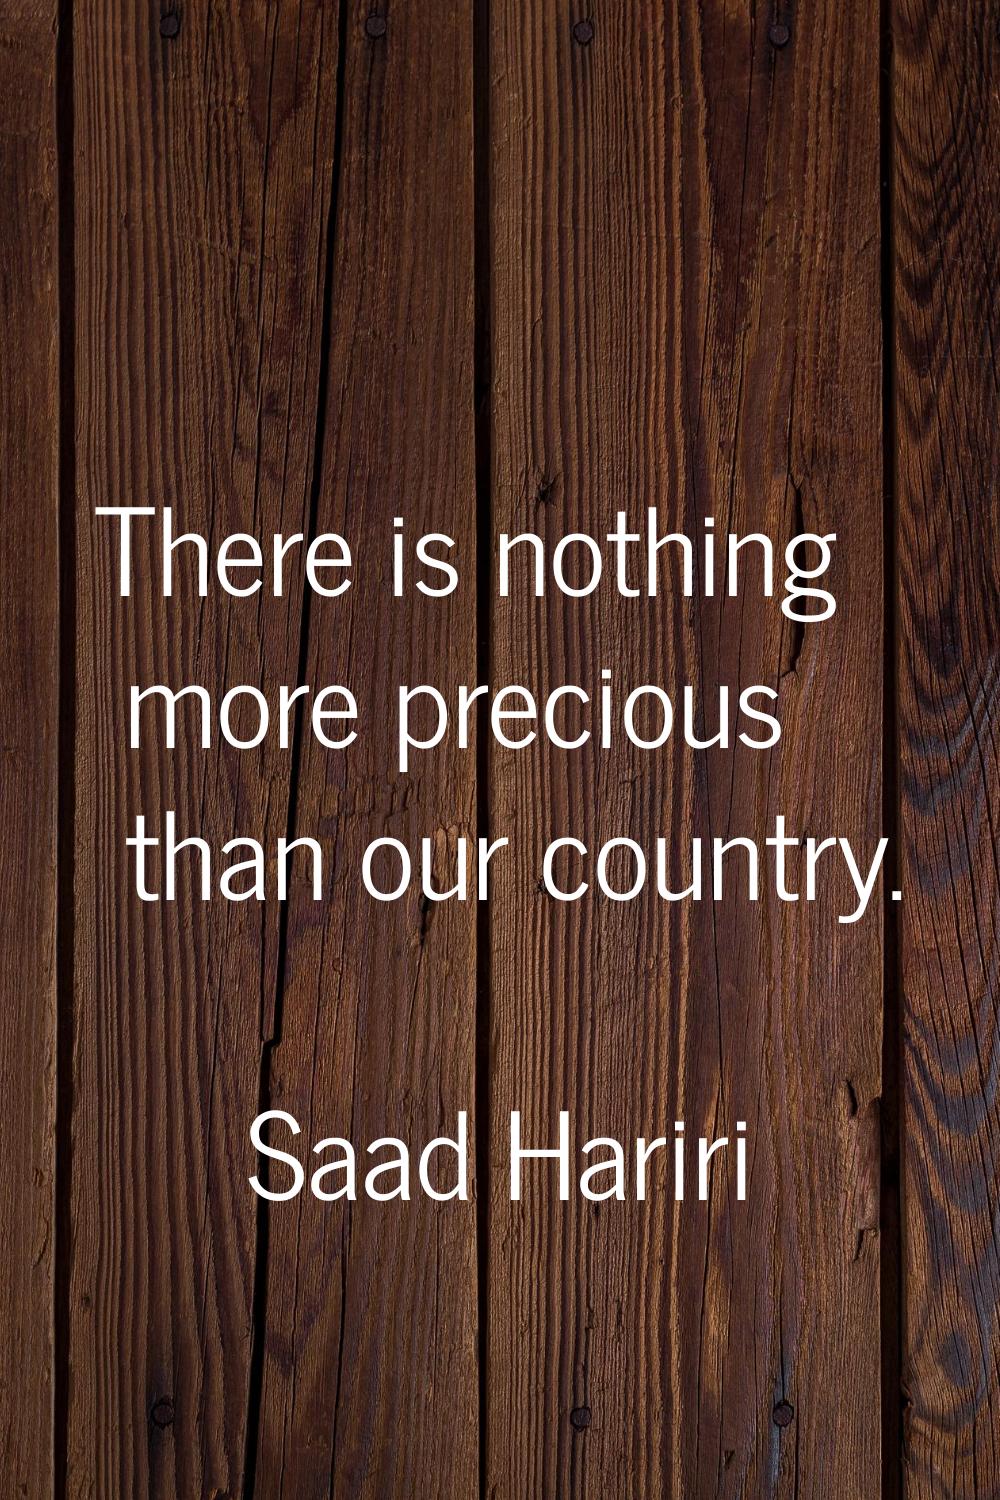 There is nothing more precious than our country.